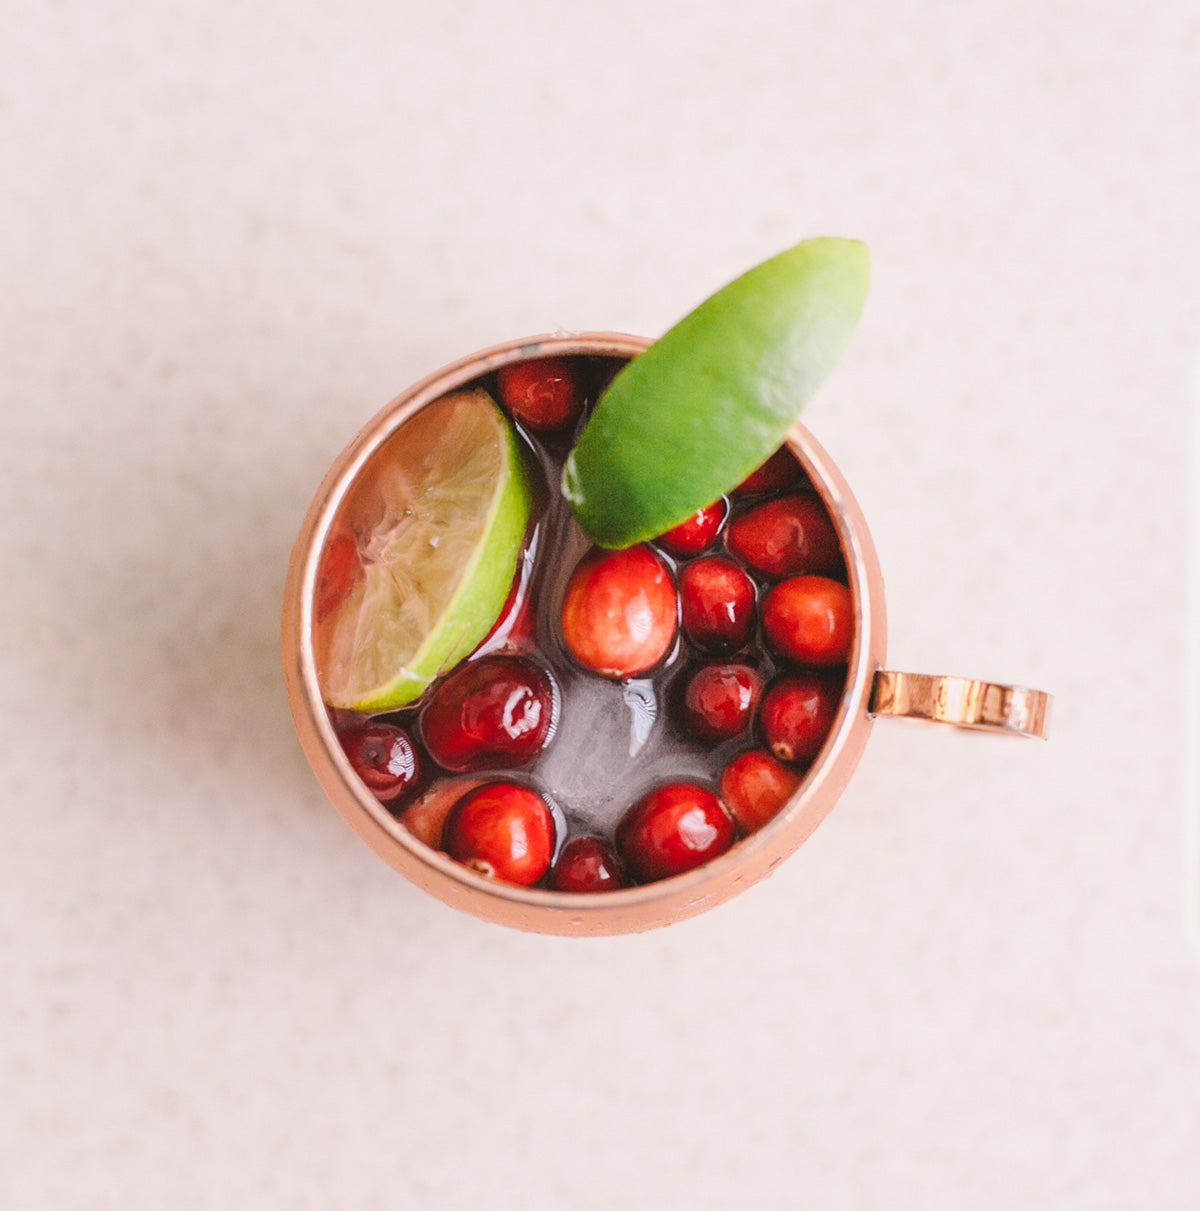 FESTIVE MOSCOW MULE COCKTAIL